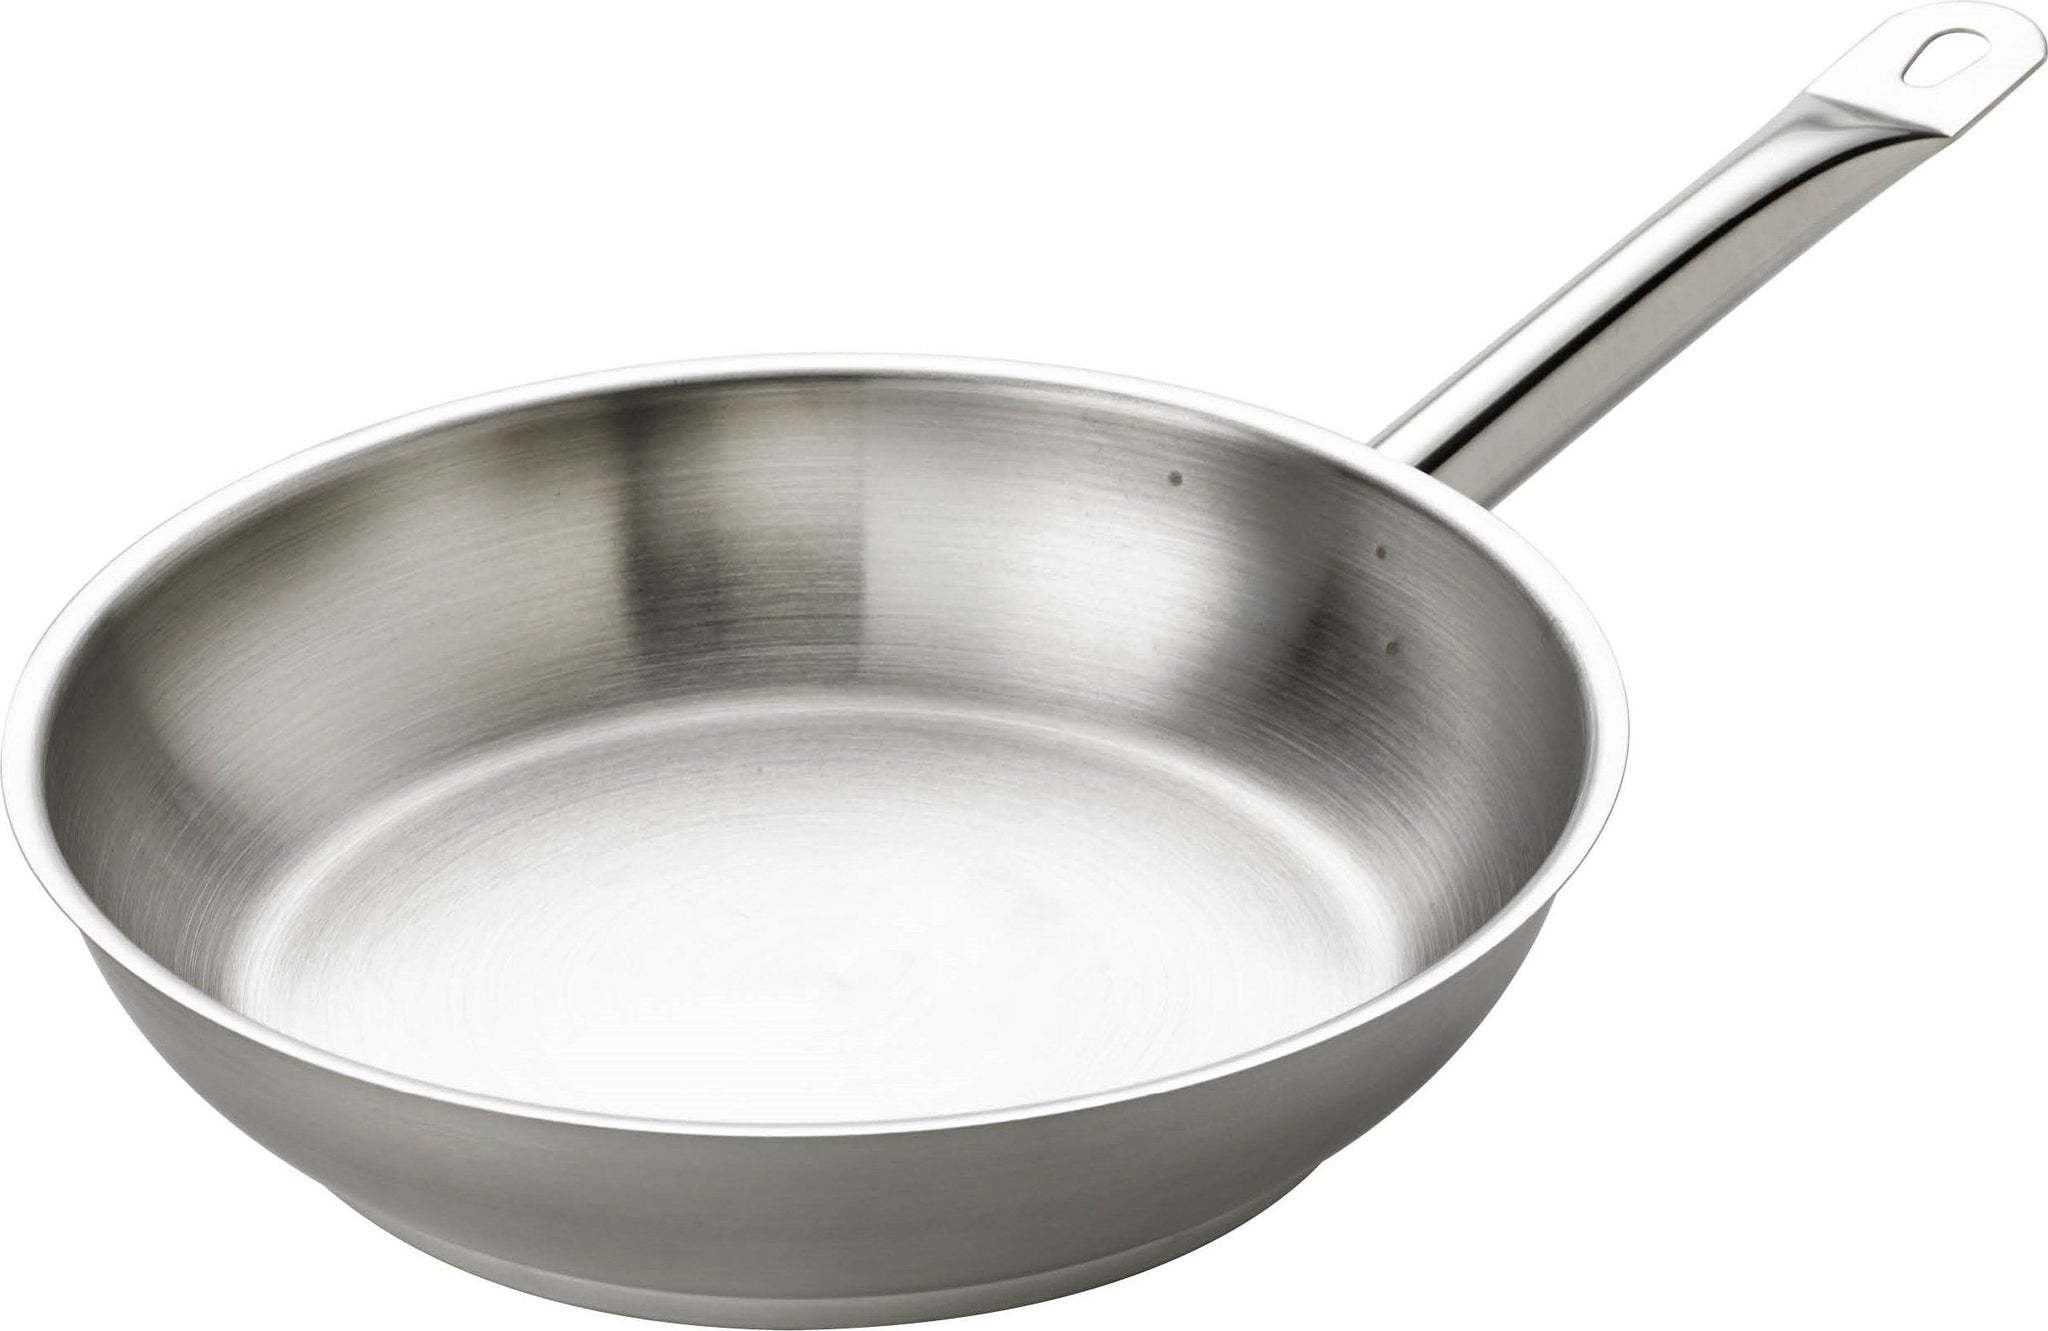 Thermalloy - 11" Stainless Steel Fry Pan - 573772